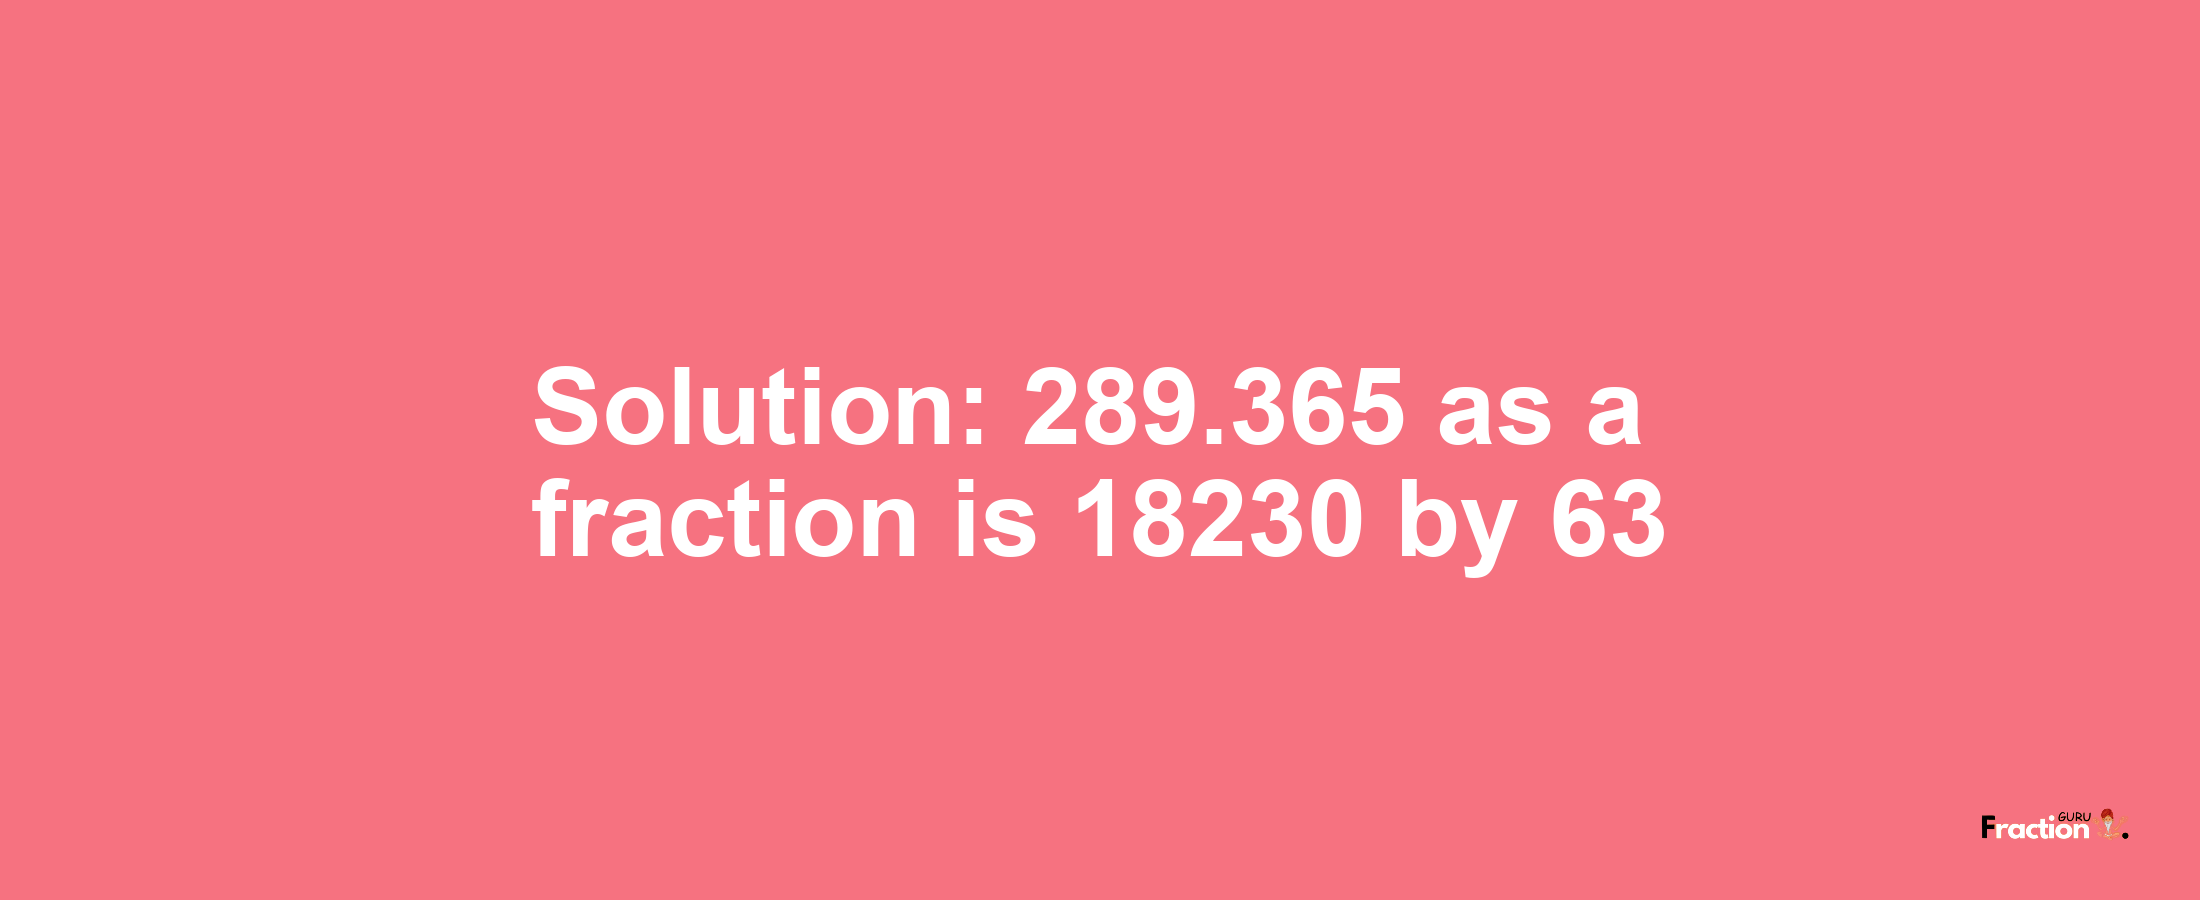 Solution:289.365 as a fraction is 18230/63